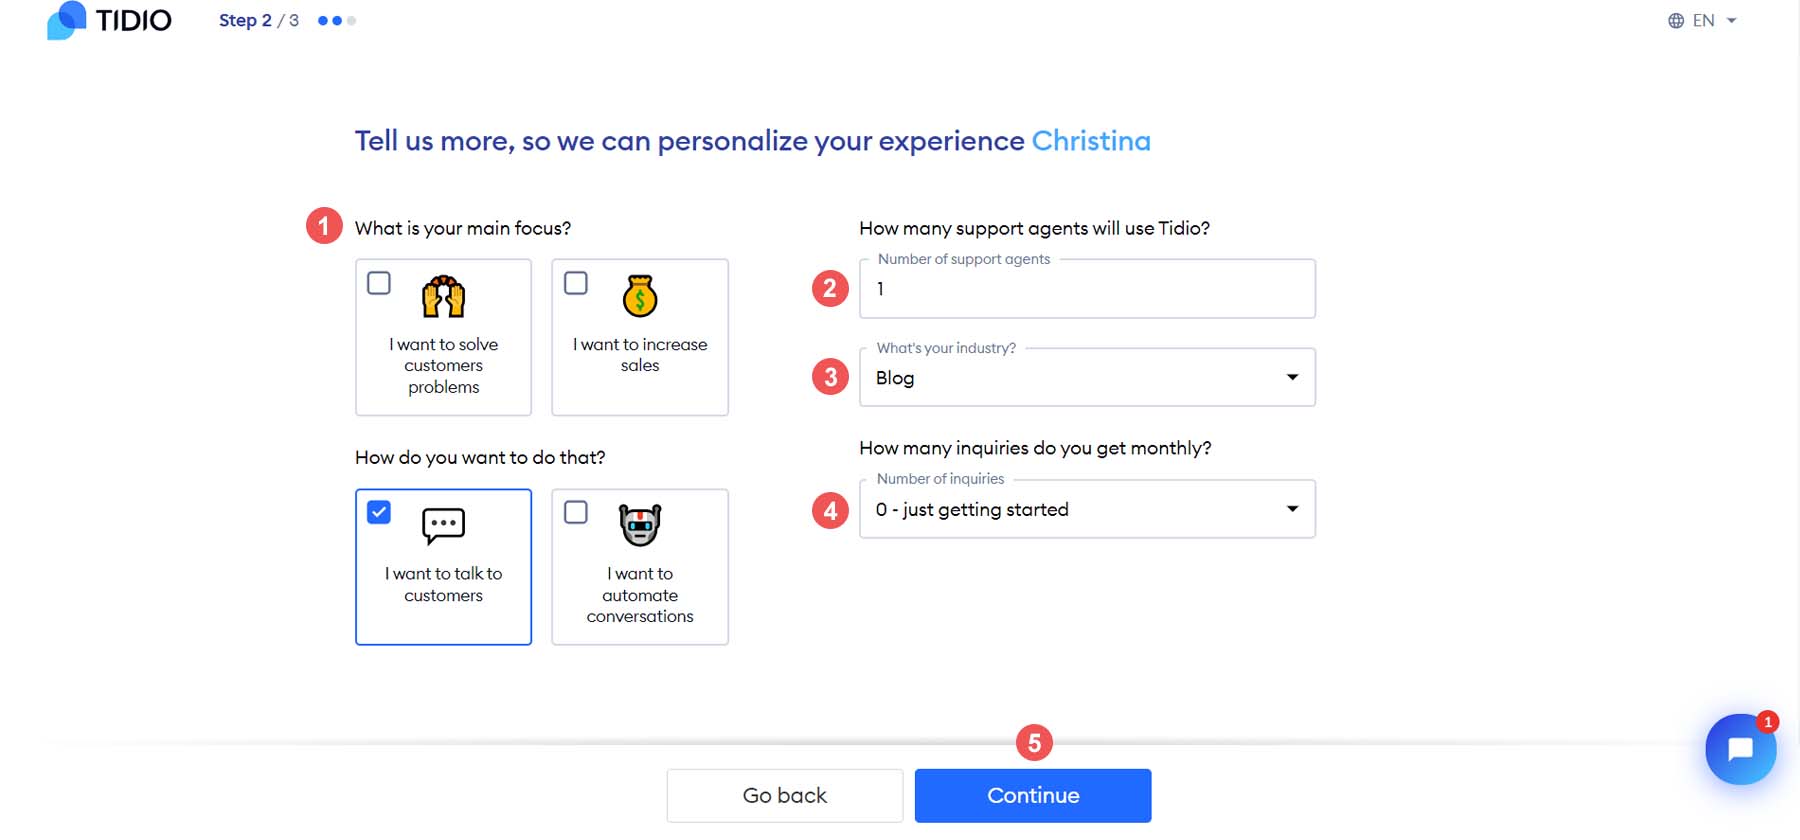 Personalize your Tidio experience